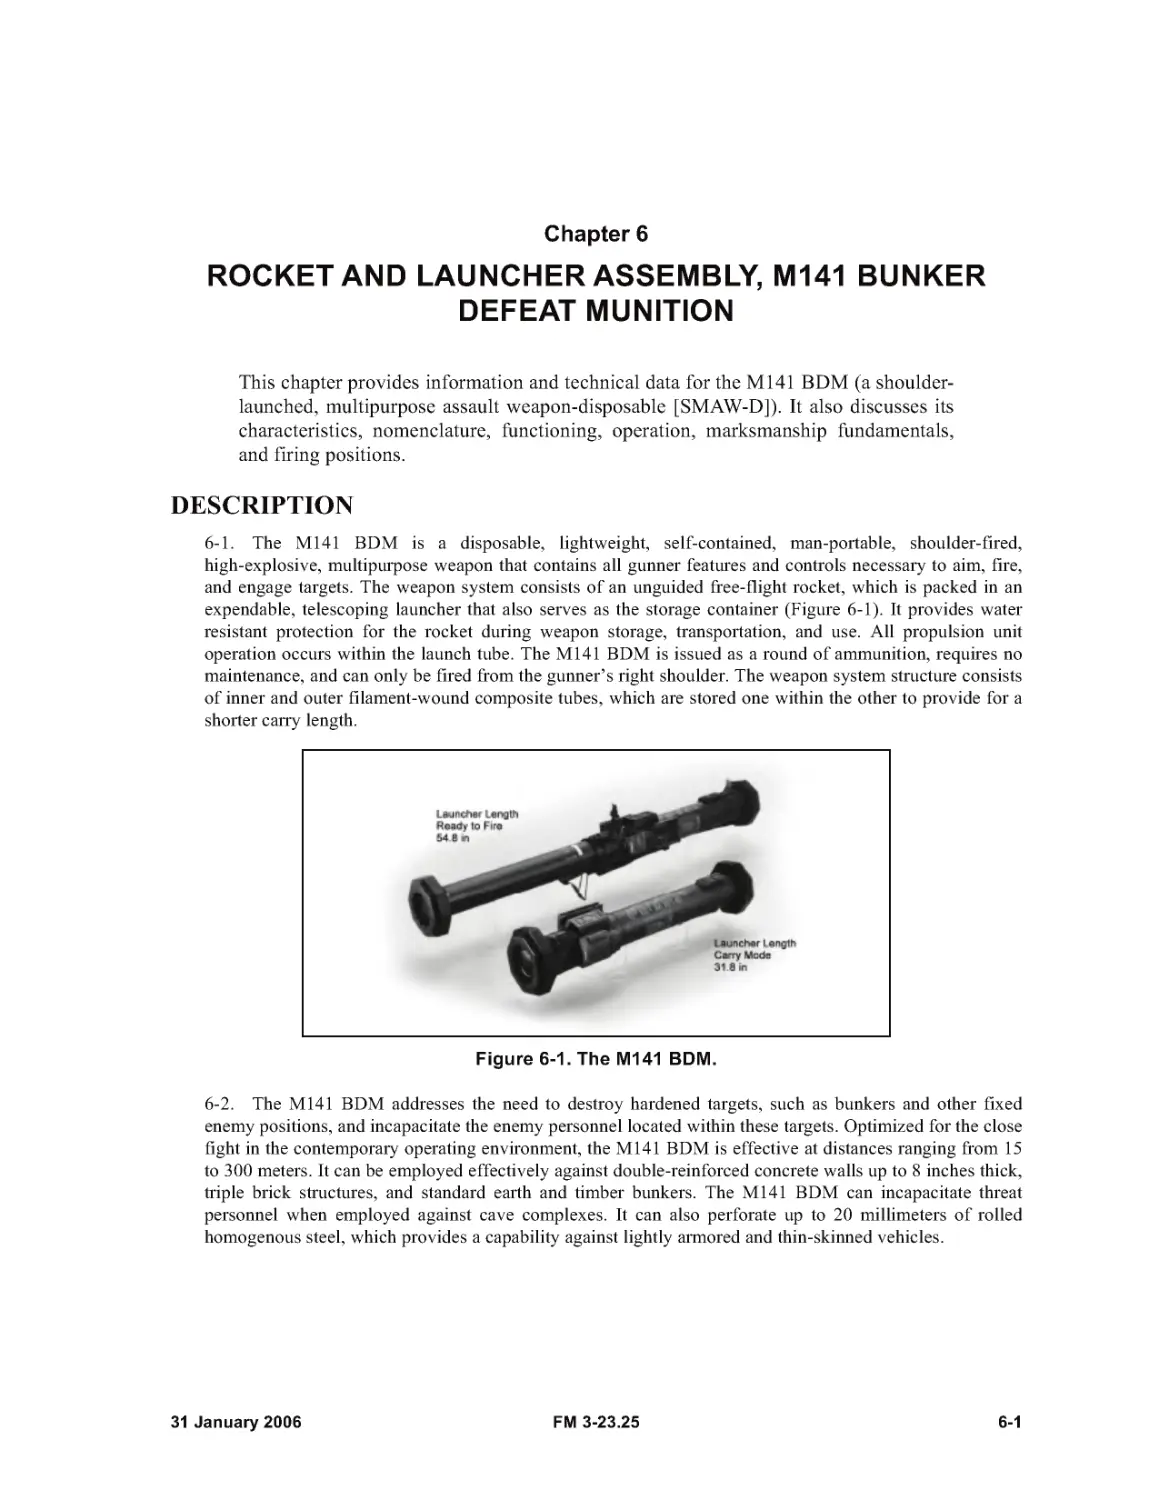 Figure 6-1. The M141 BDM.
Chapter 6 - ROCKET AND LAUNCHER ASSEMBLY, M141 BUNKER DEFEAT MUNITION